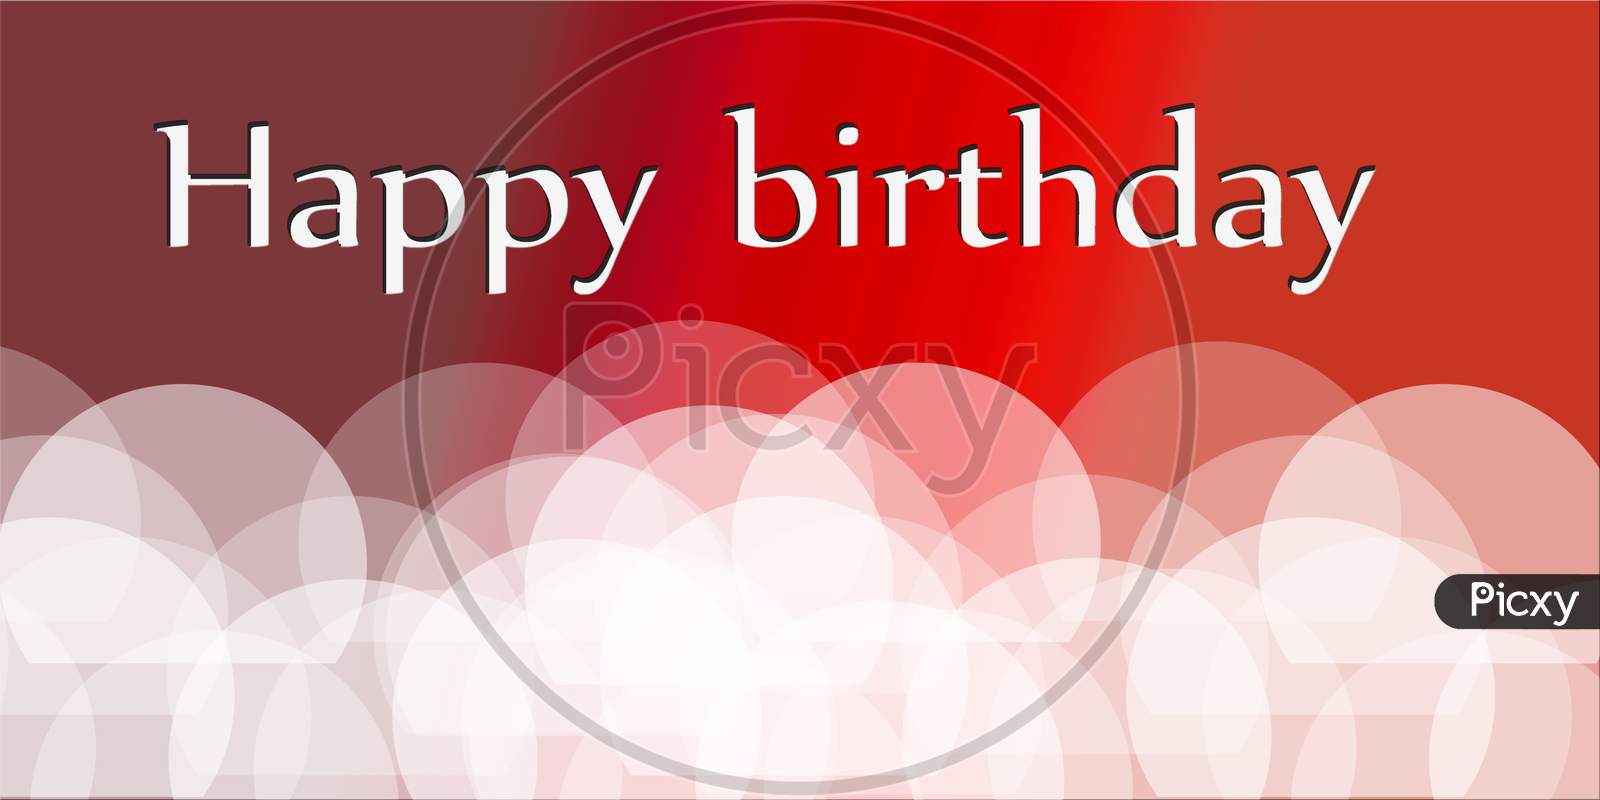 happy birthday background in white and red color